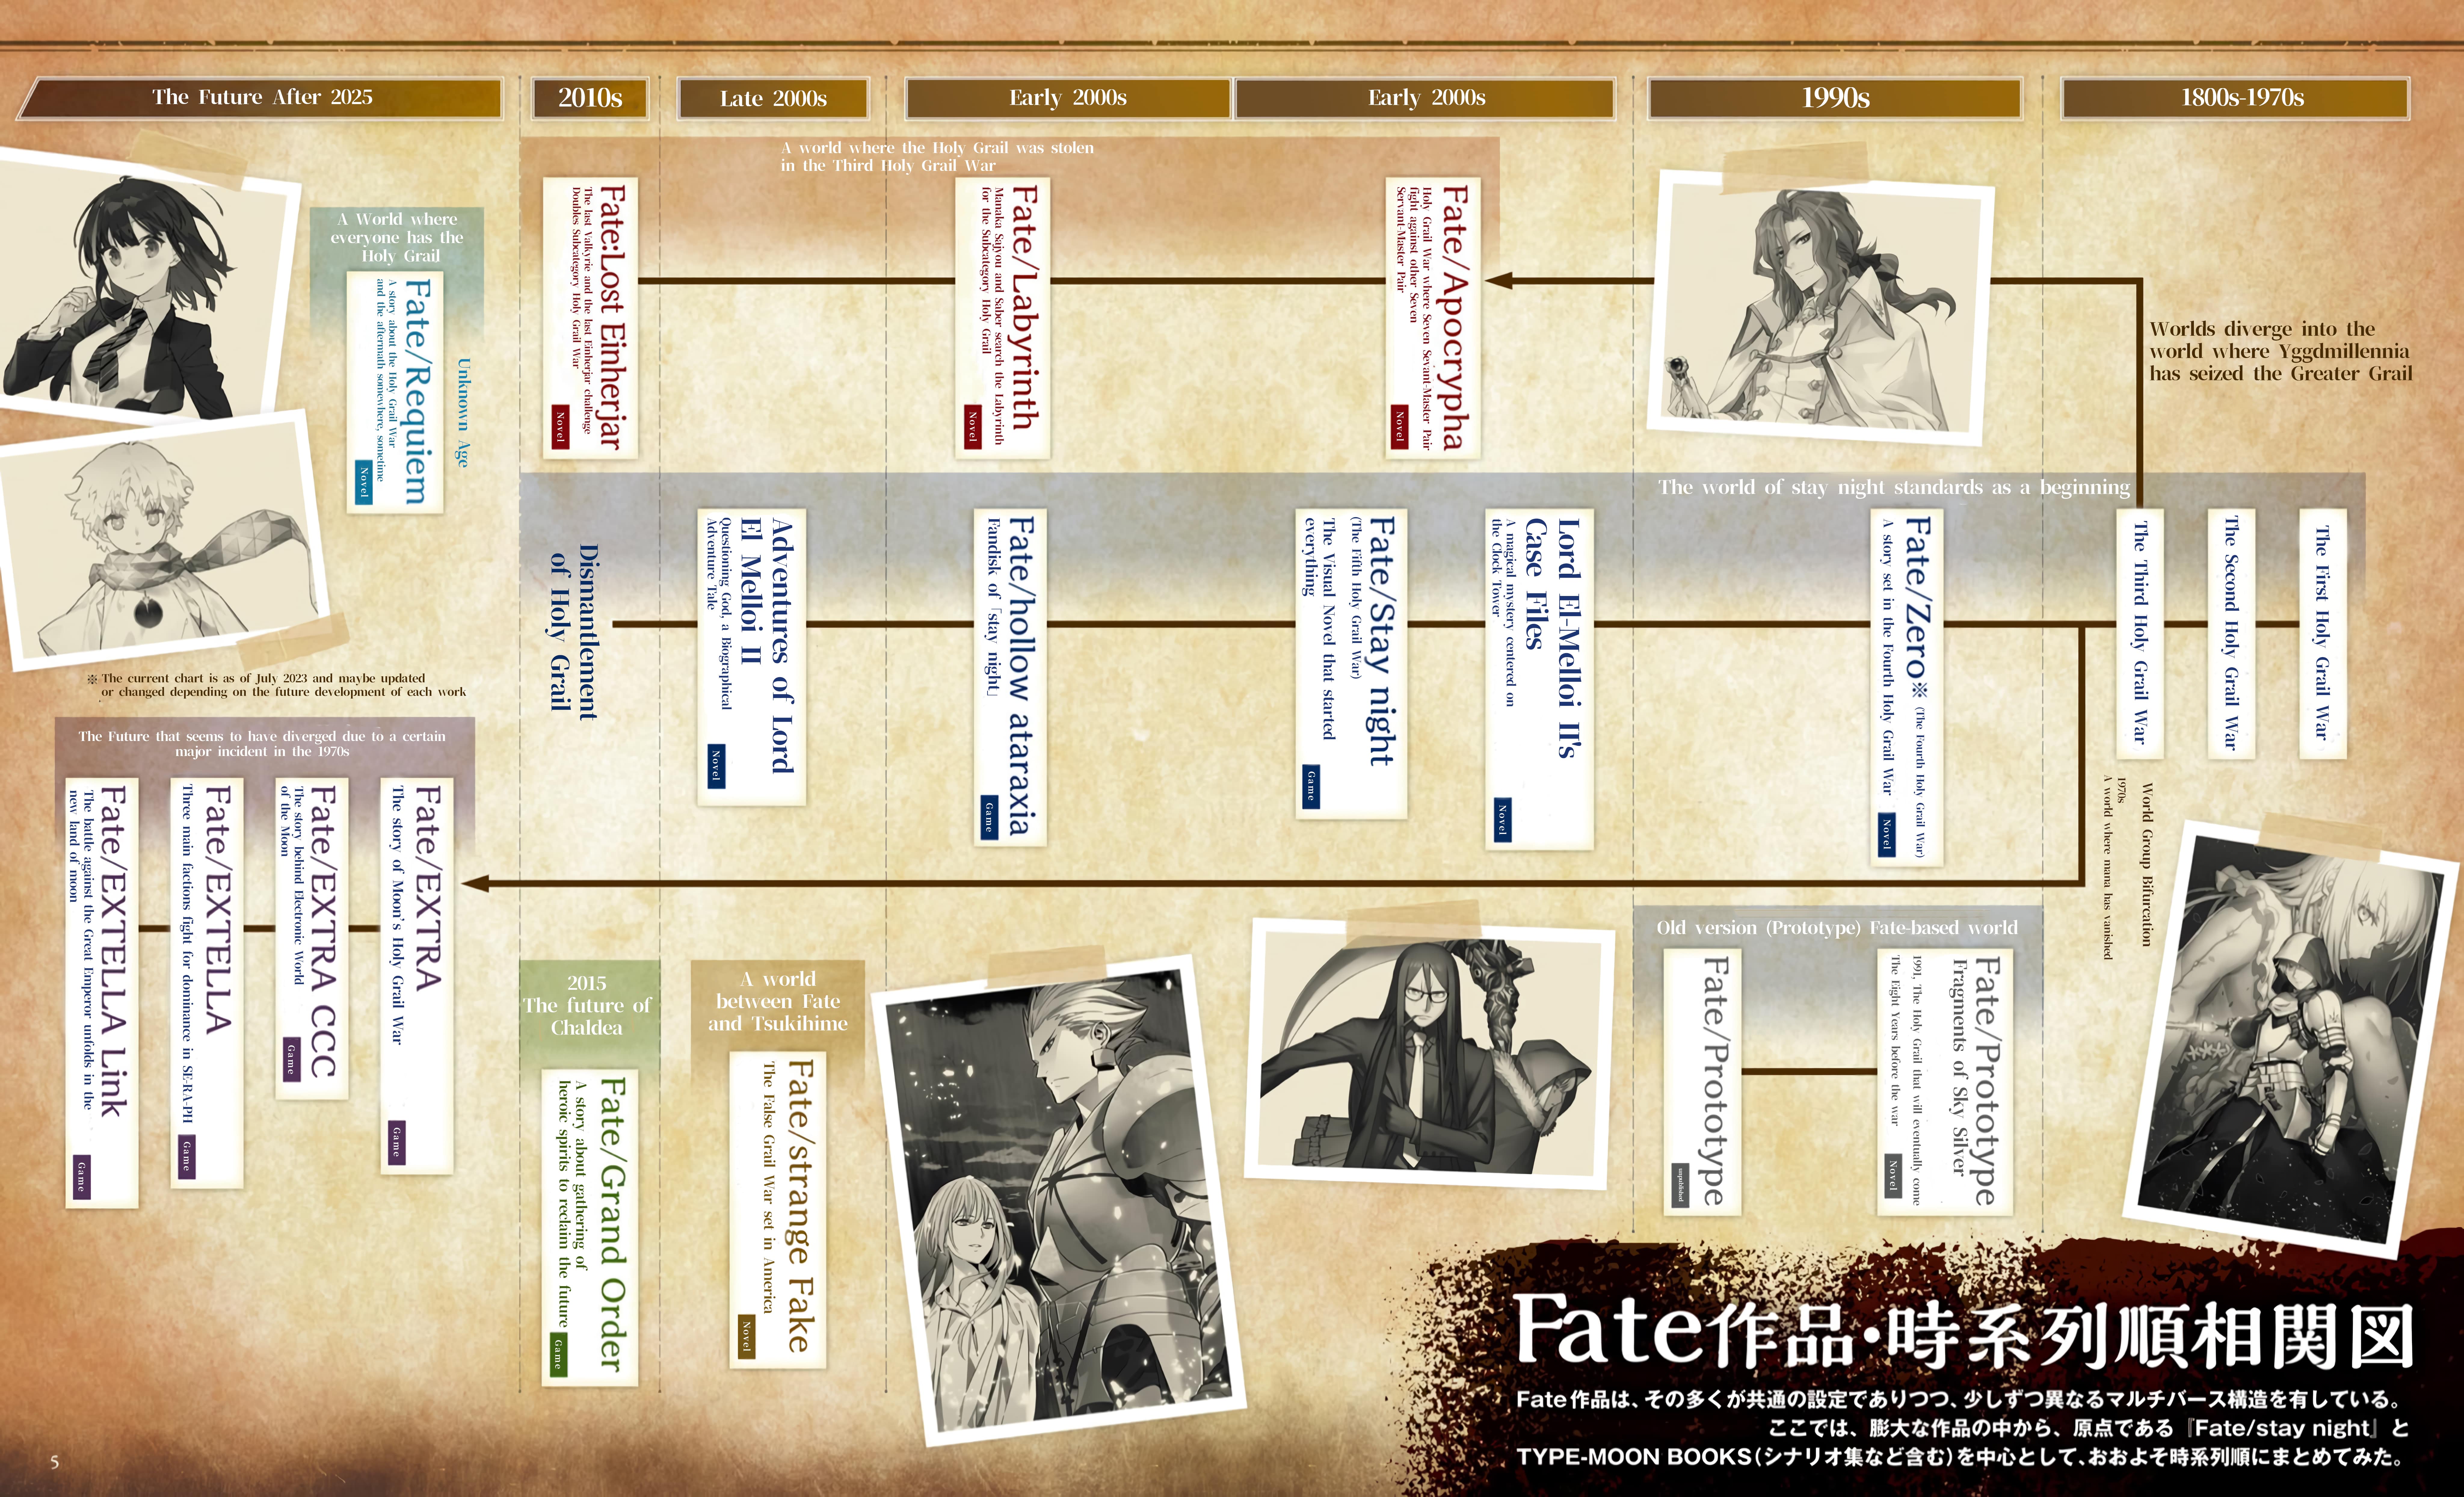 I made this and i need to know if it works as a simplified fate  chronology are there any issues?: fatestaynight